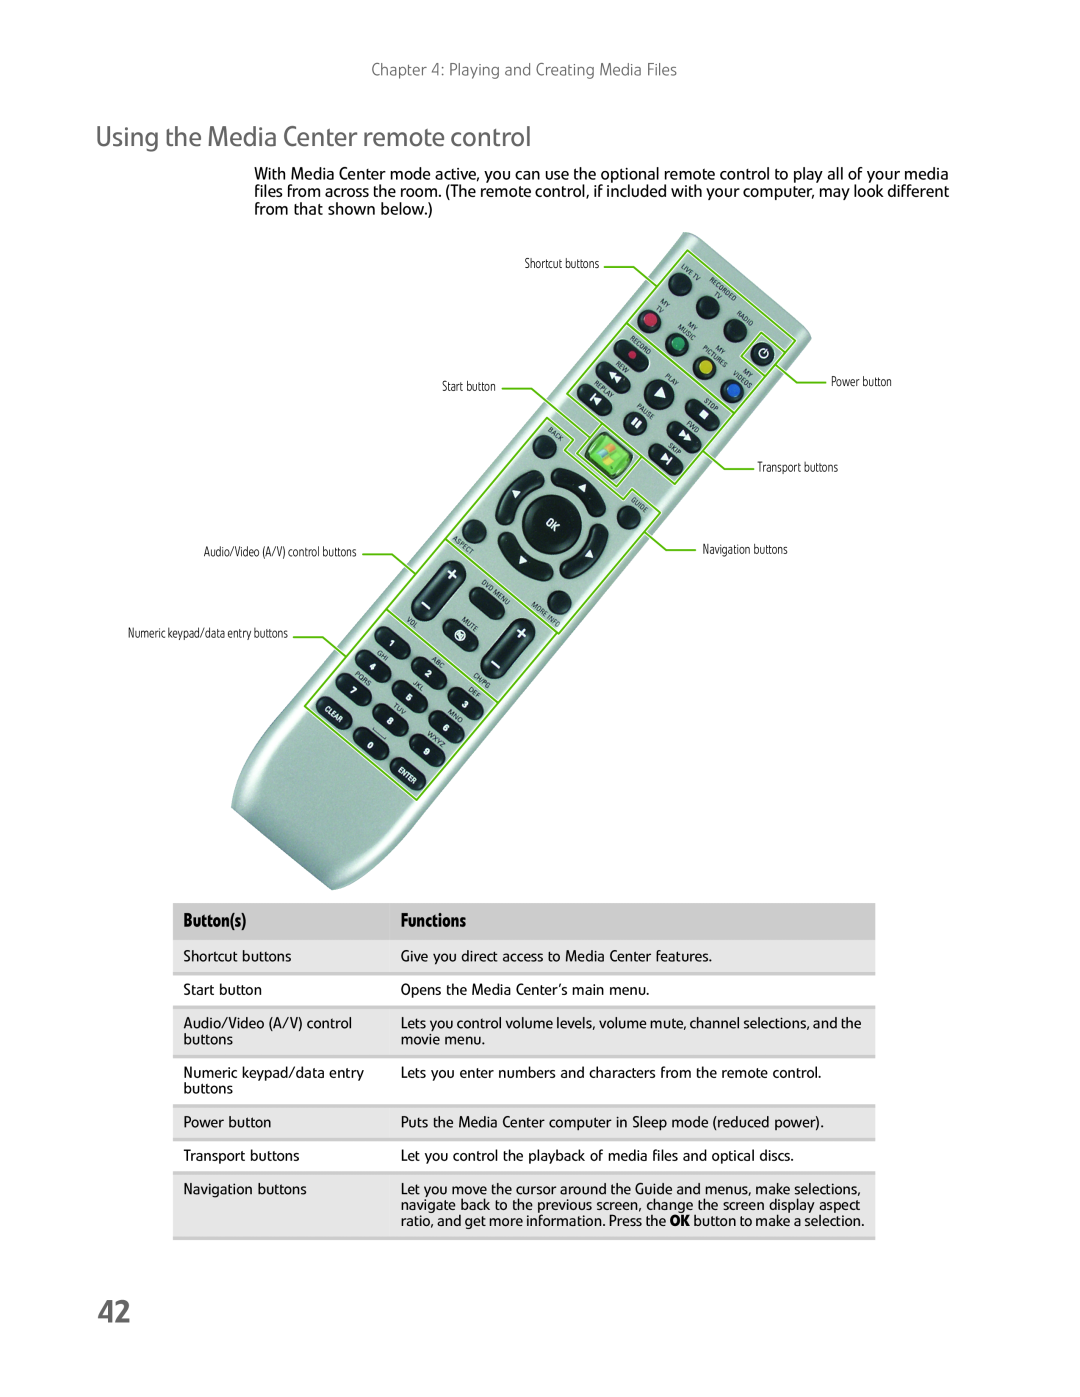 eMachines EL1200 Series manual Using the Media Center remote control, Buttons, Functions, Playing and Creating Media Files 